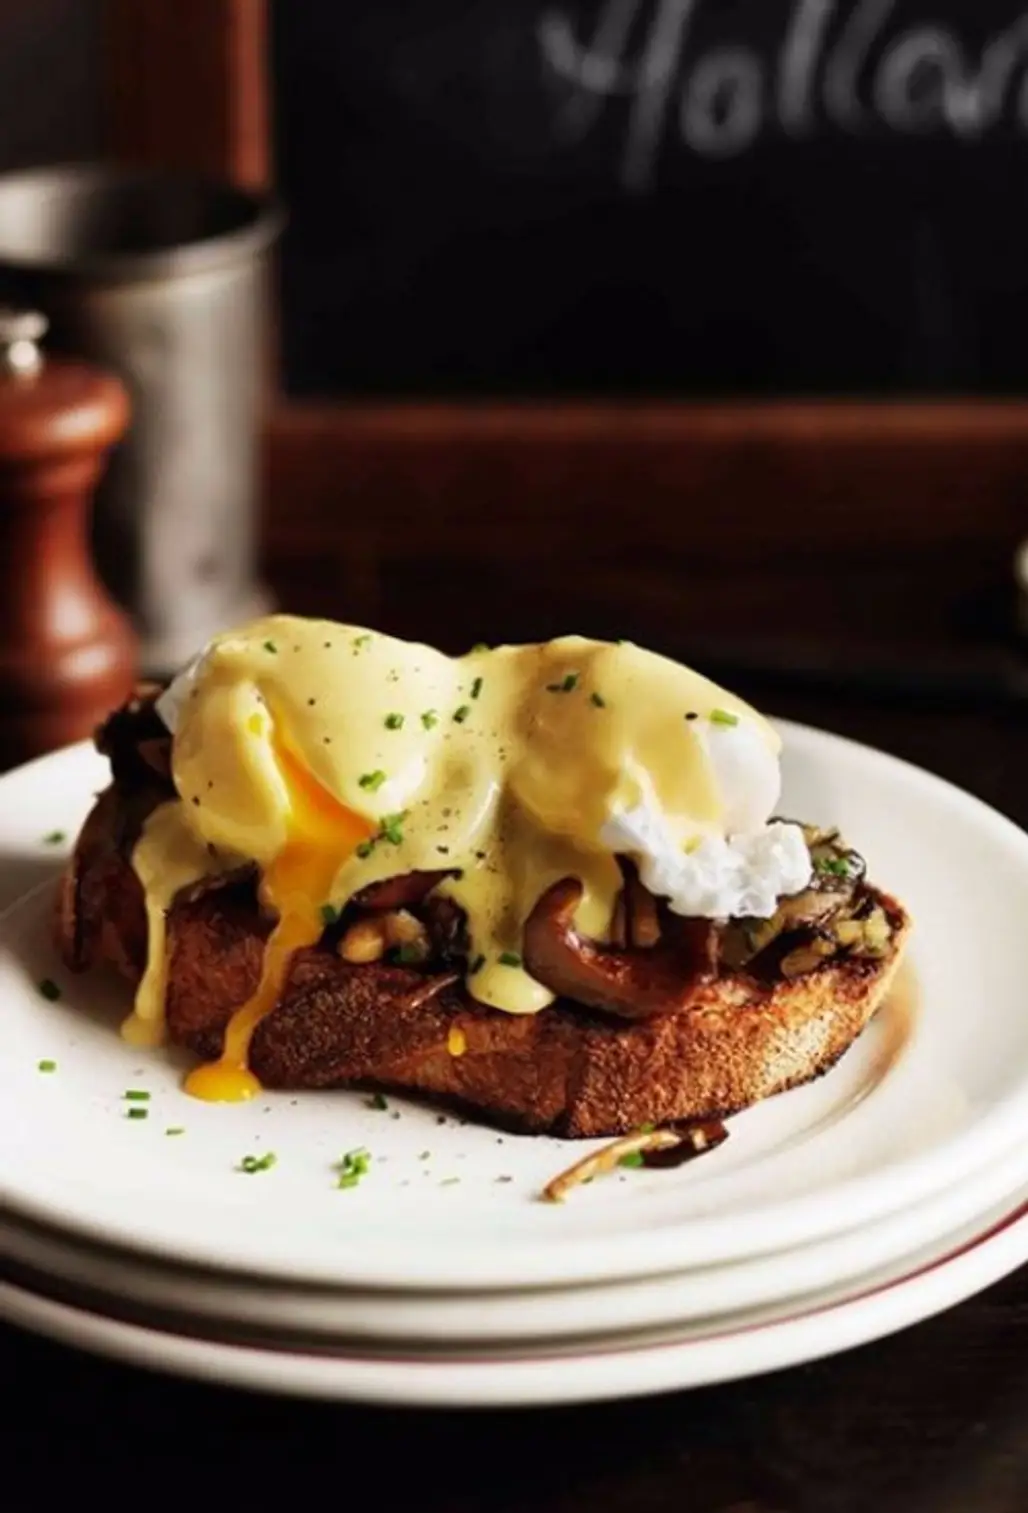 Mushrooms on Toast with Poached Eggs and Hollandaise